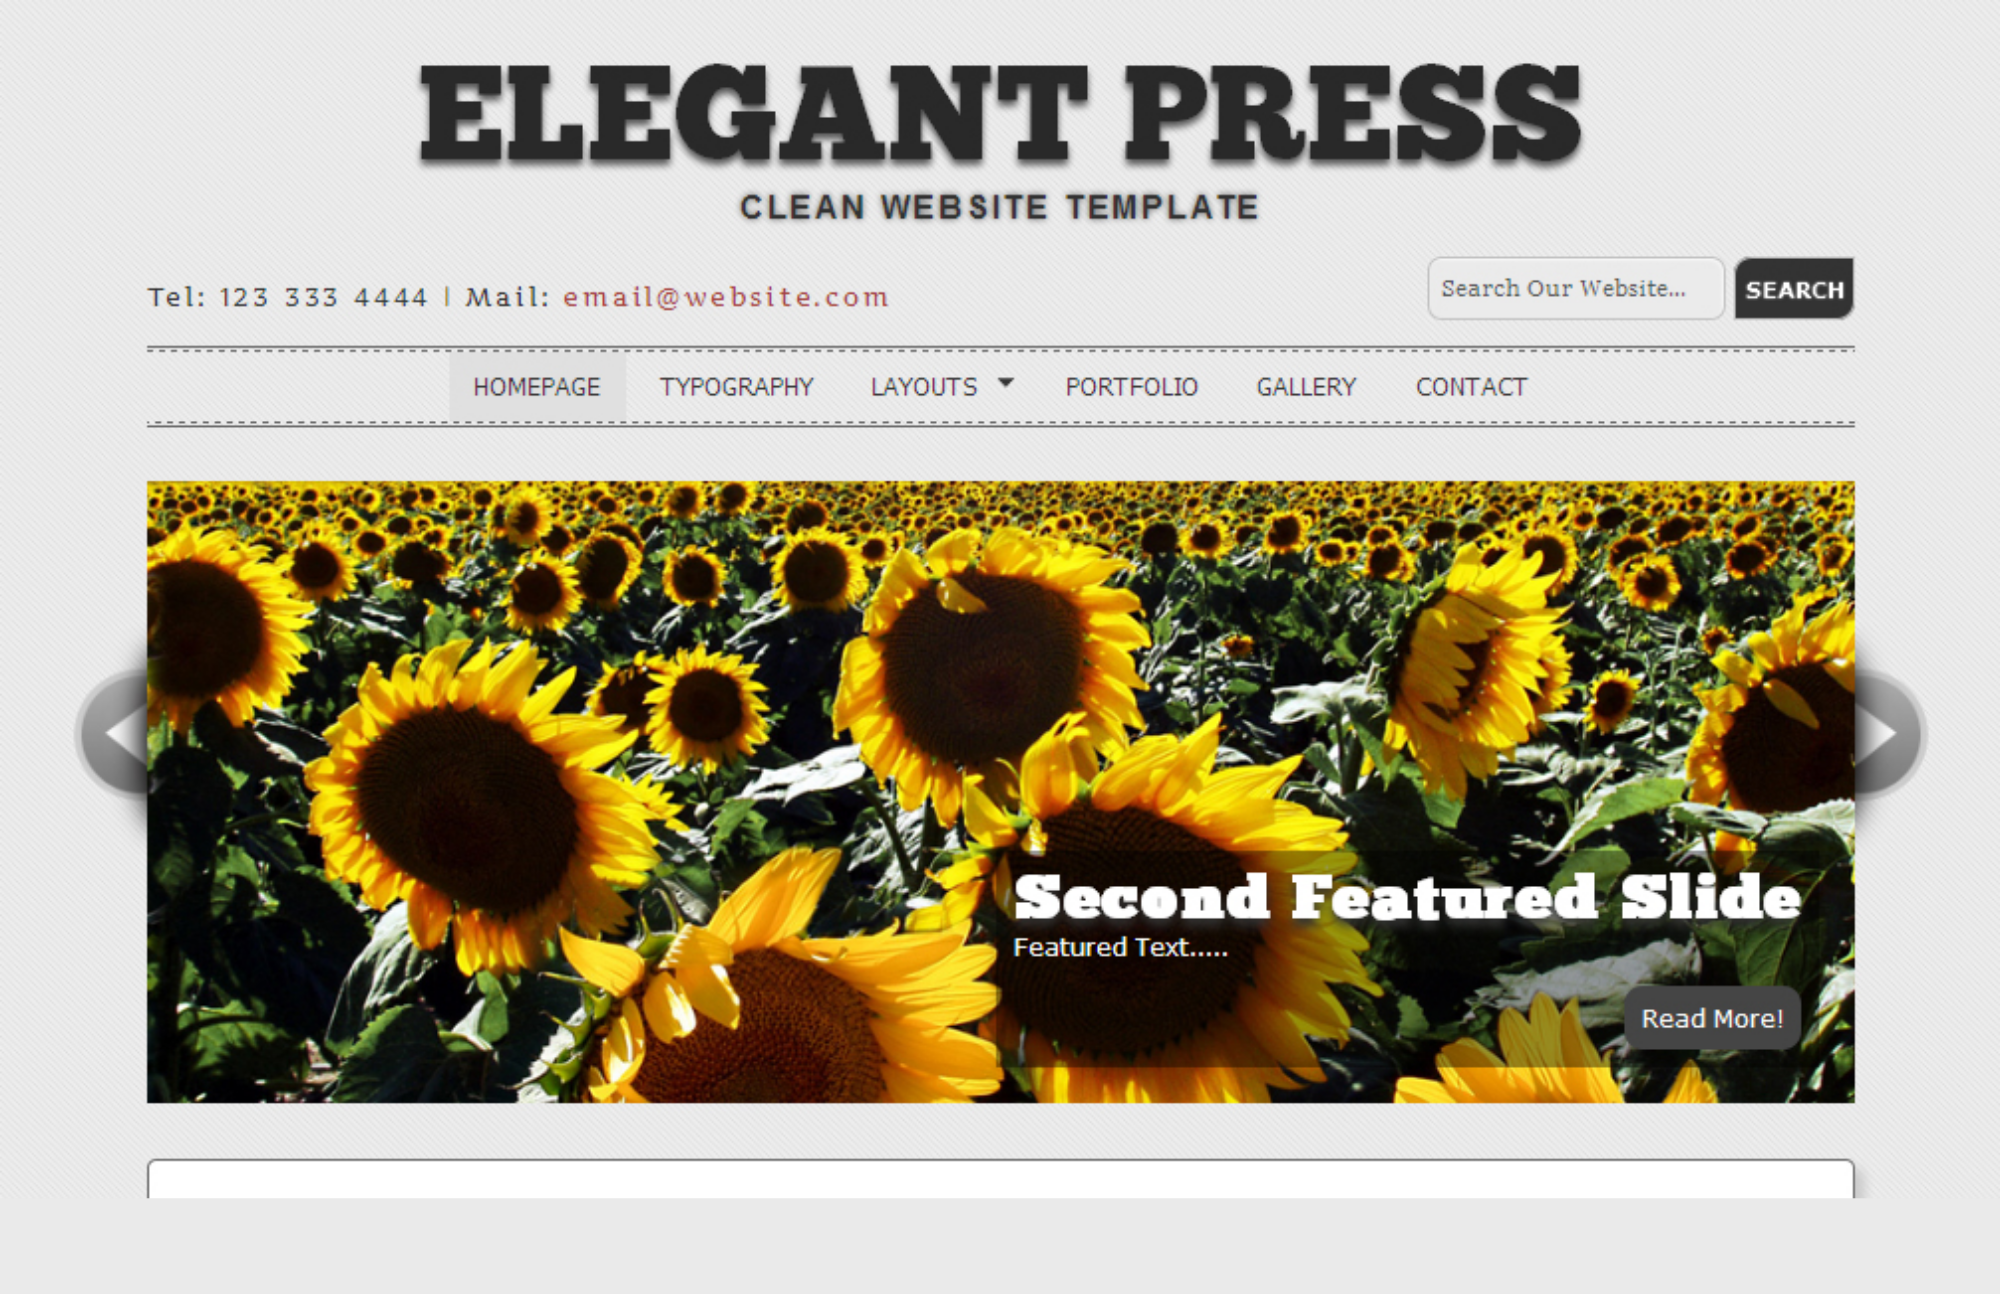 ElegantPress's website, with additional information on the tabs